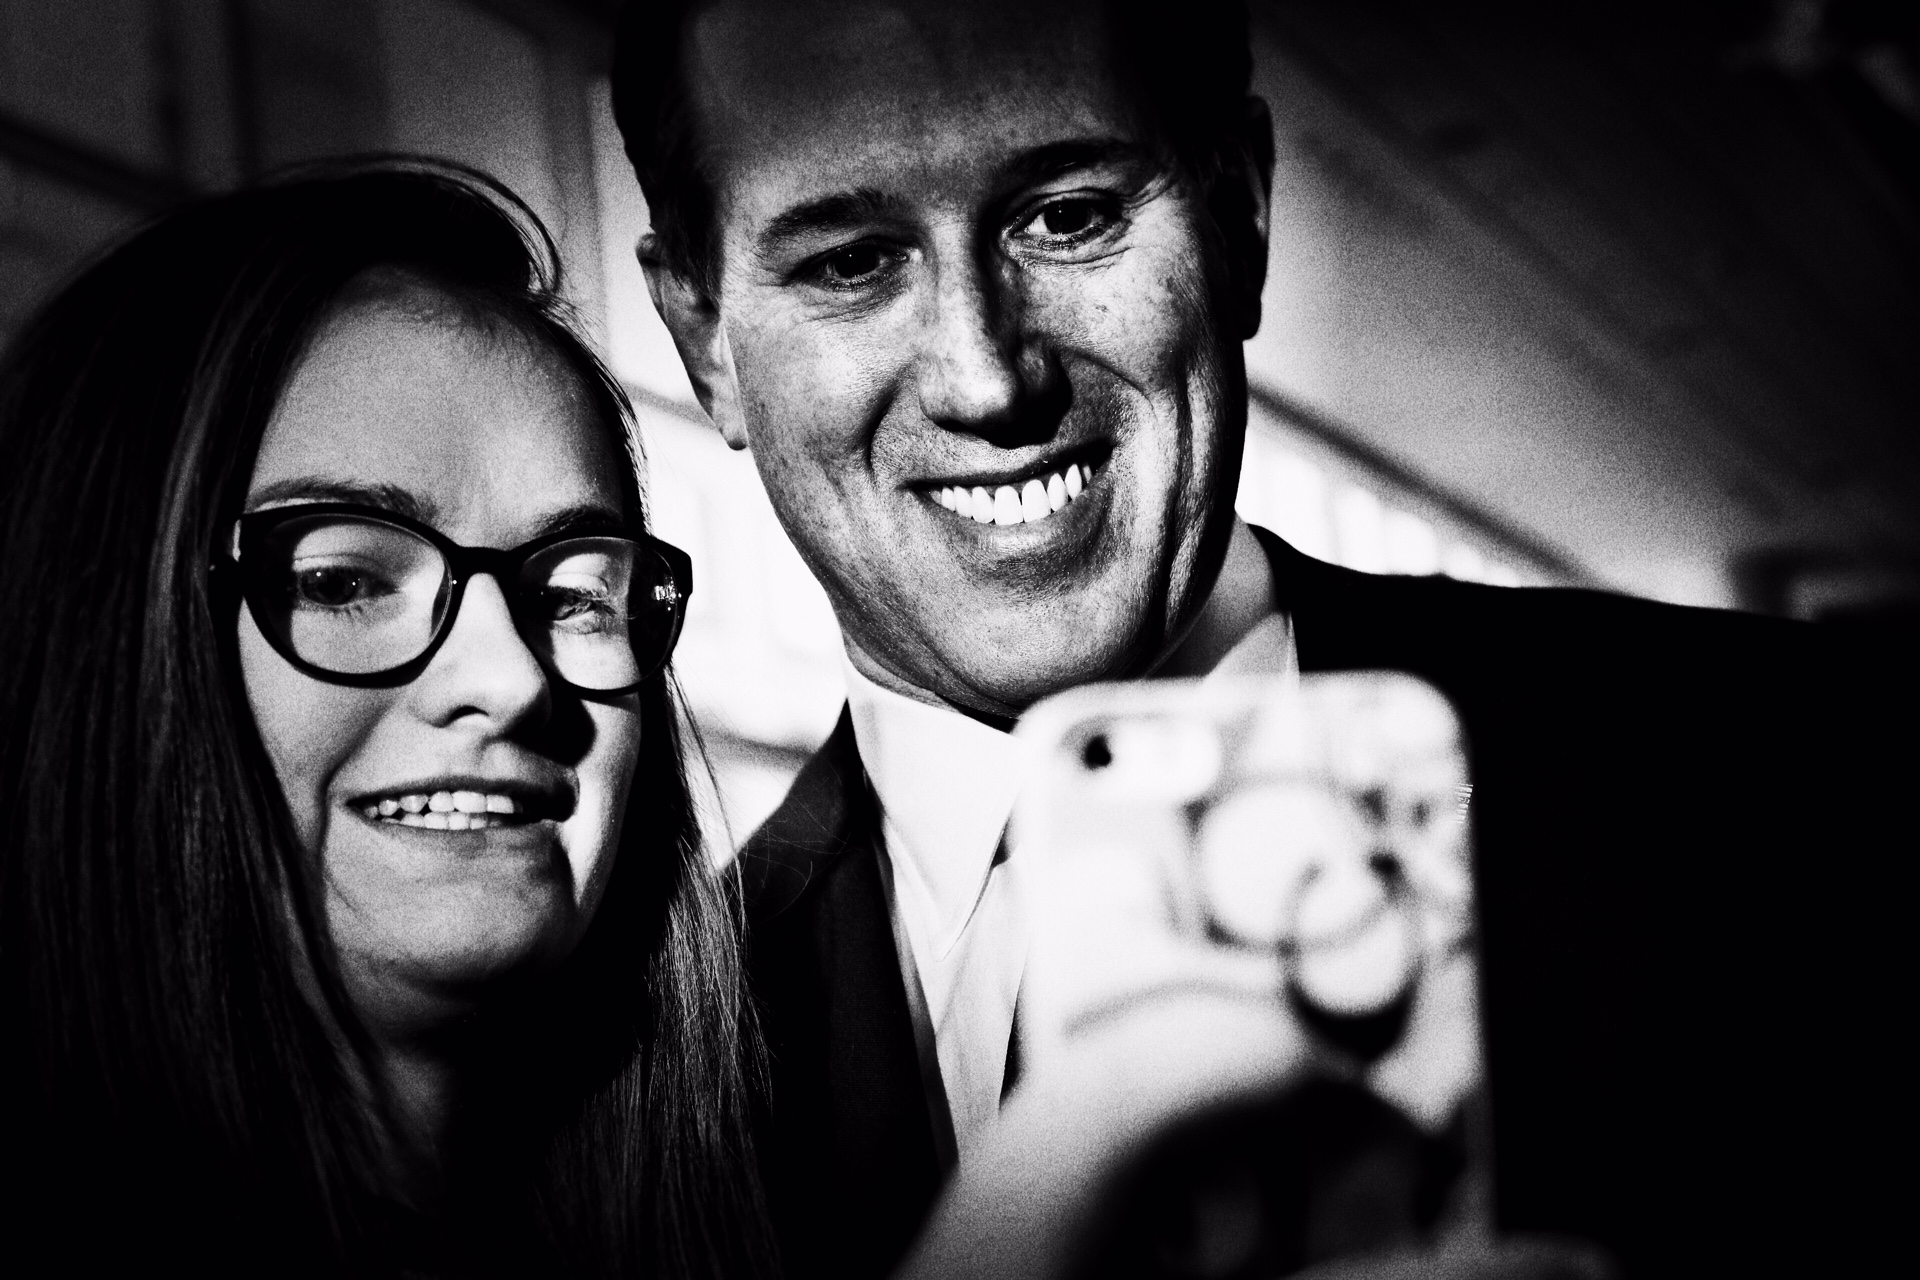 Rick Santorum takes a selfie with a supporter at CPAC in National Harbor, Md. on Feb. 27, 2015.